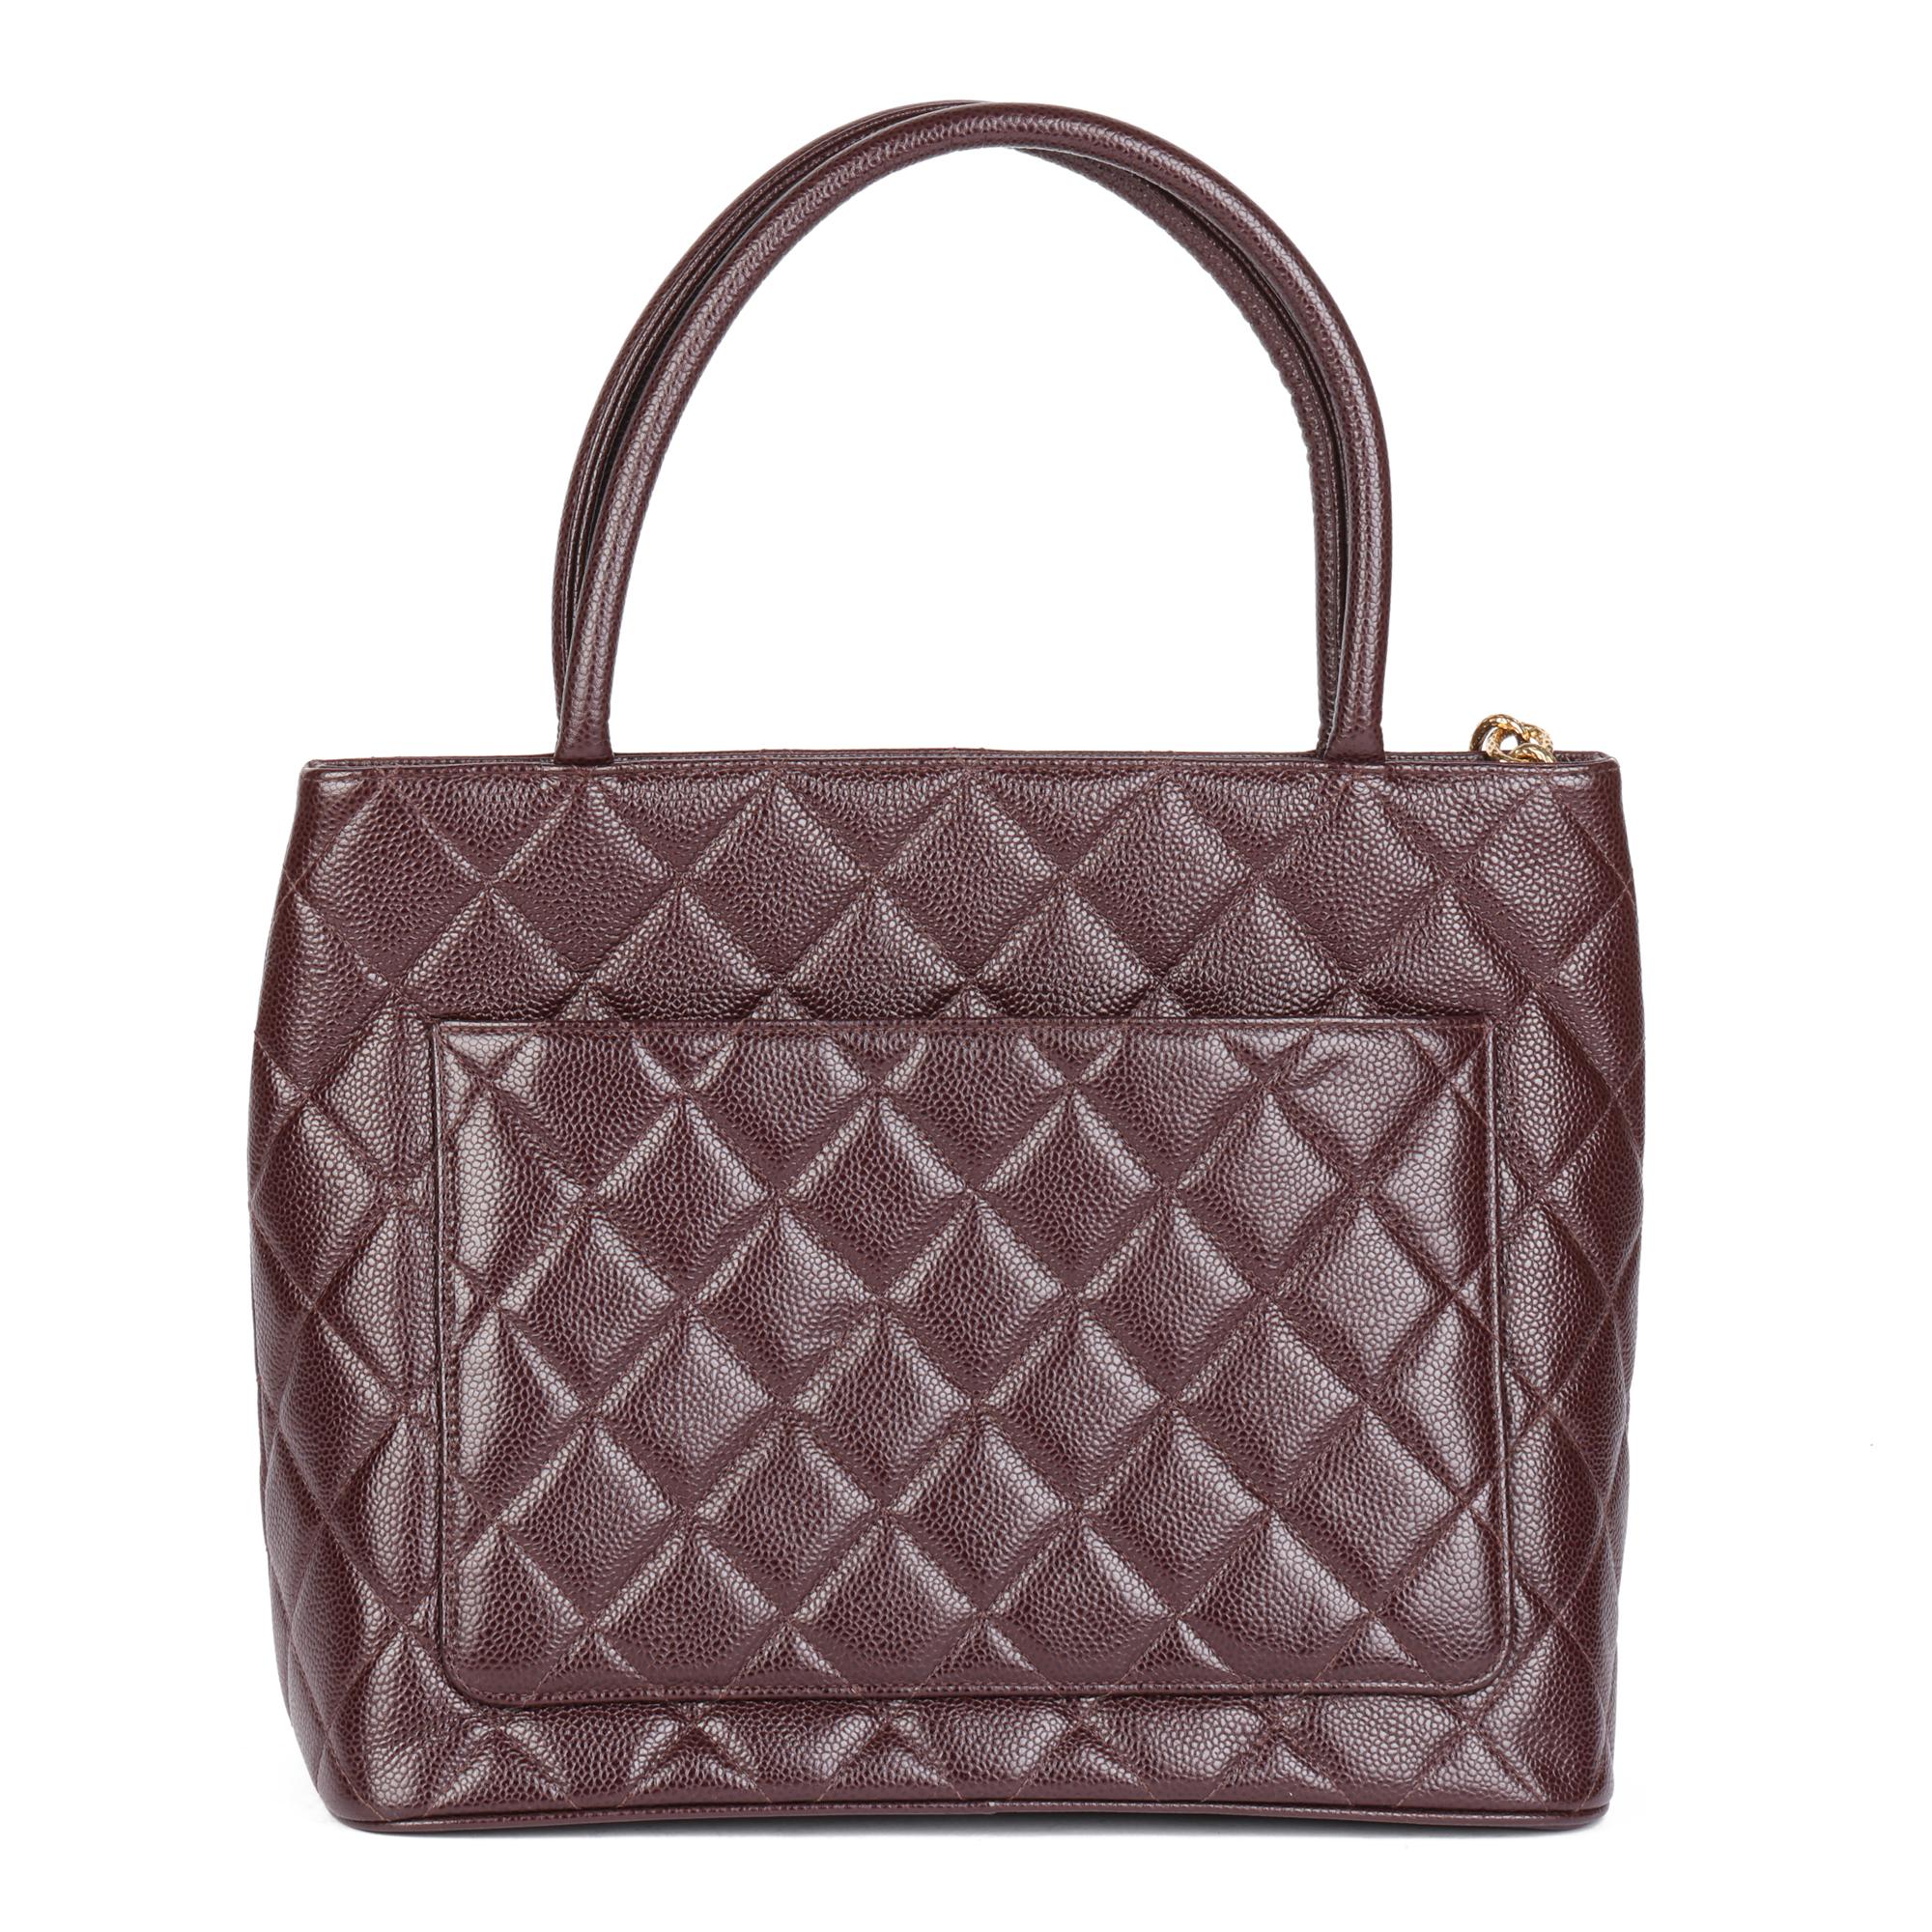 Women's CHANEL Chocolate Brown Quilted Caviar Leather Vintage Medallion Tote